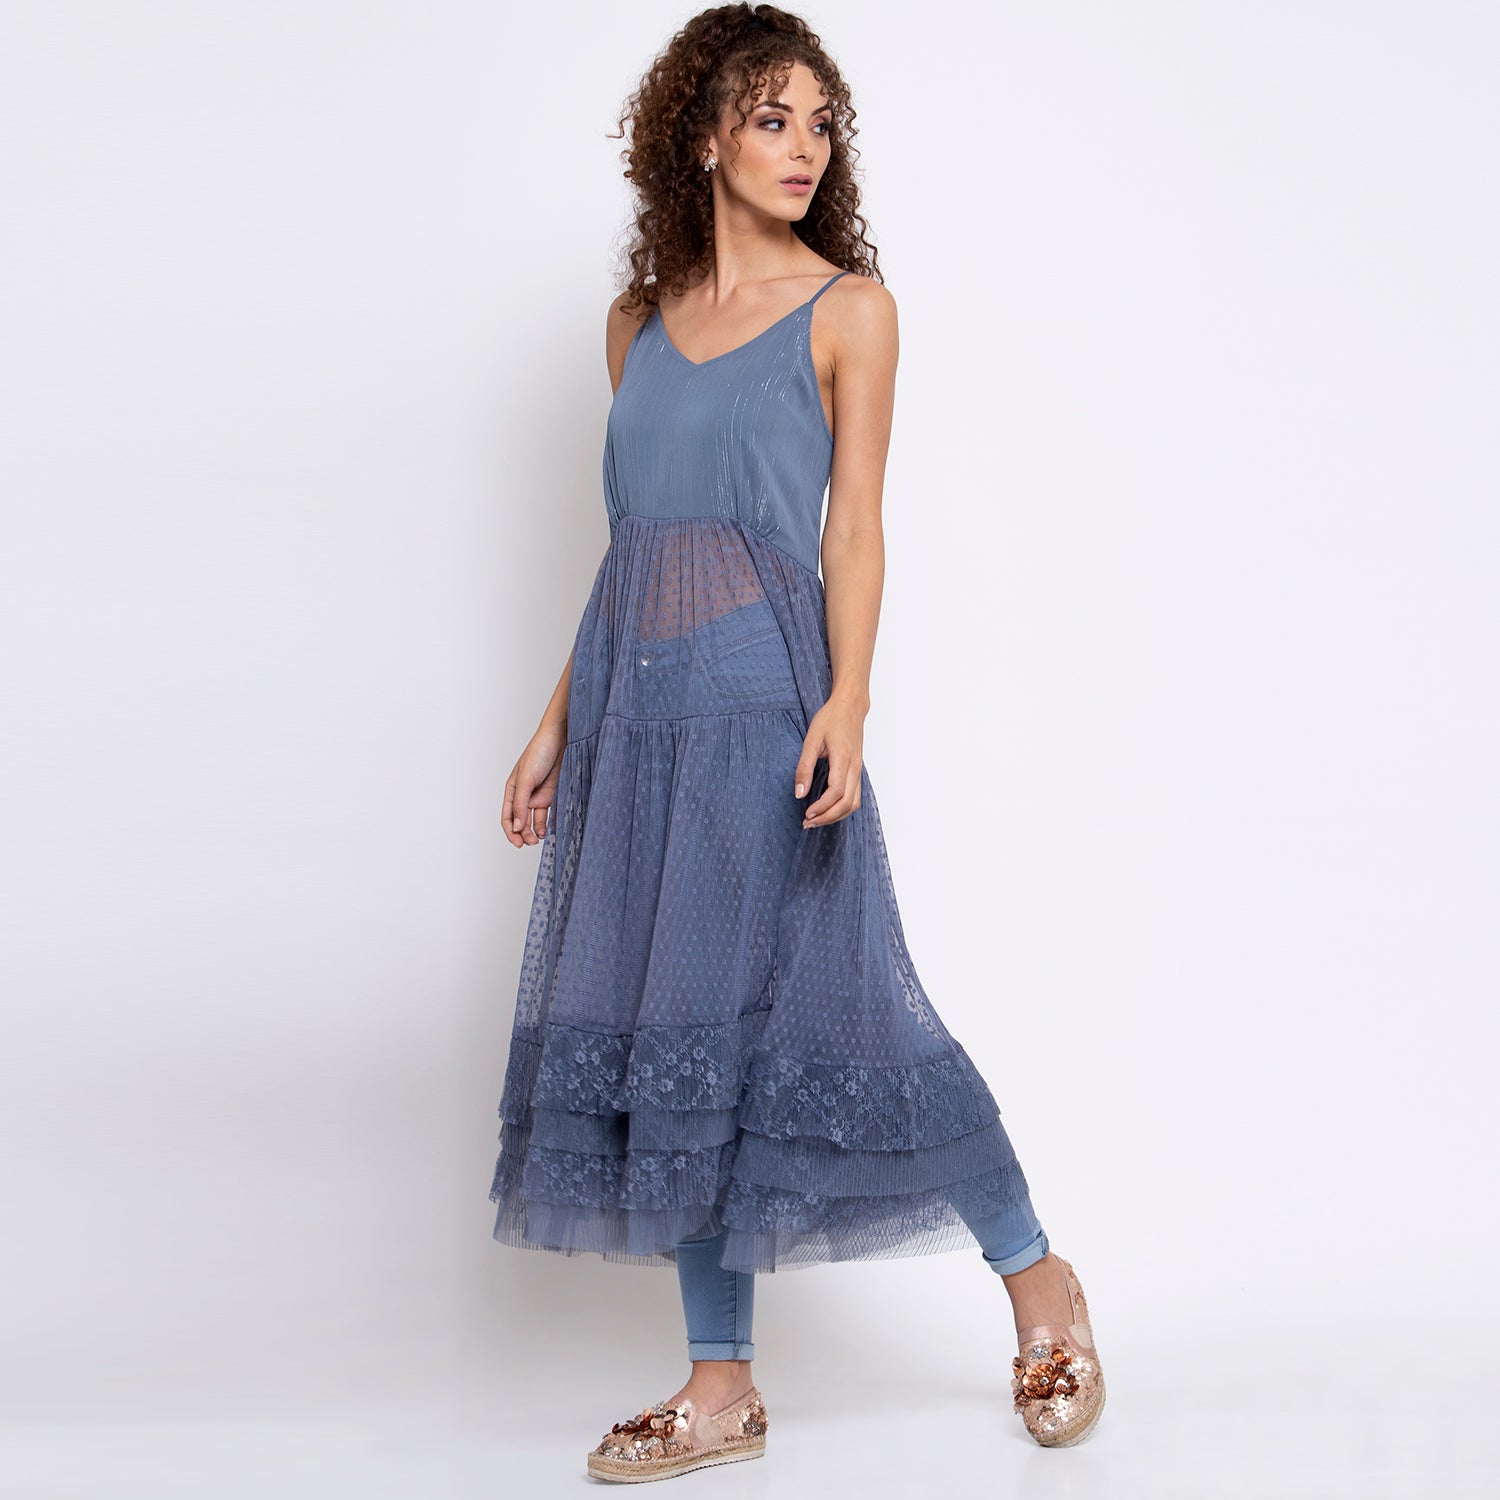 Blue Dotted Net Dress With Frill